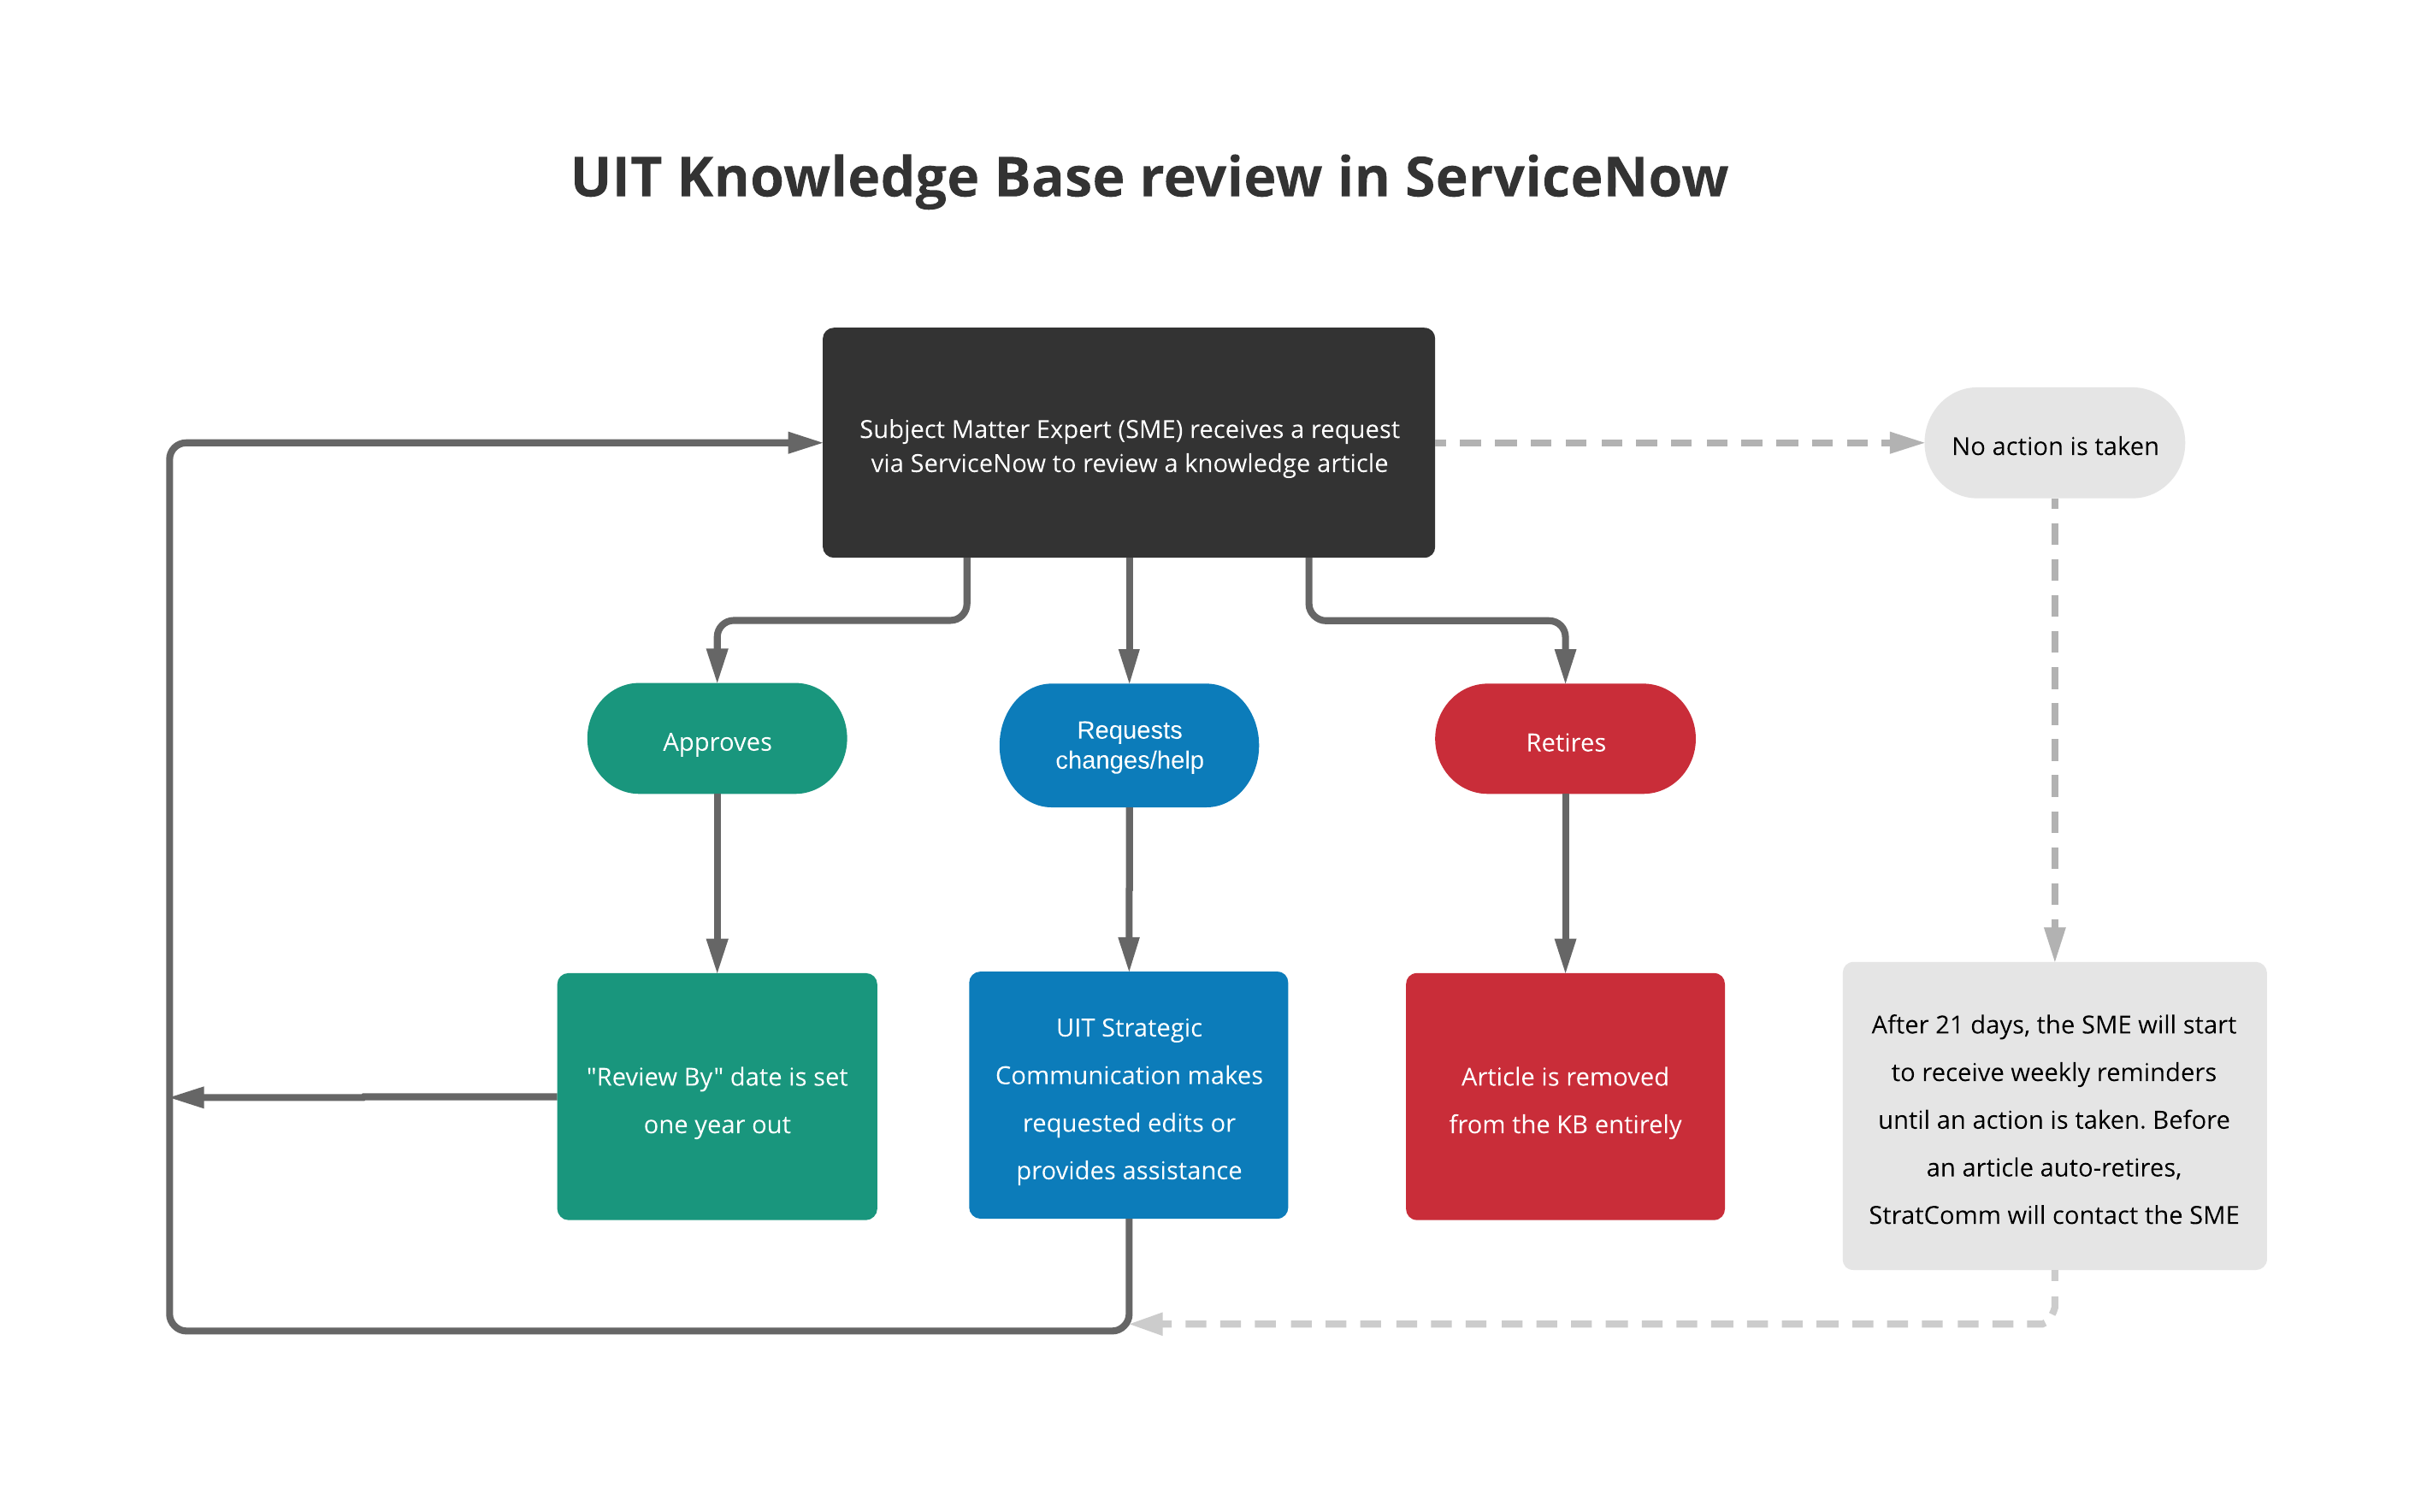 servicenow knowledge base article review